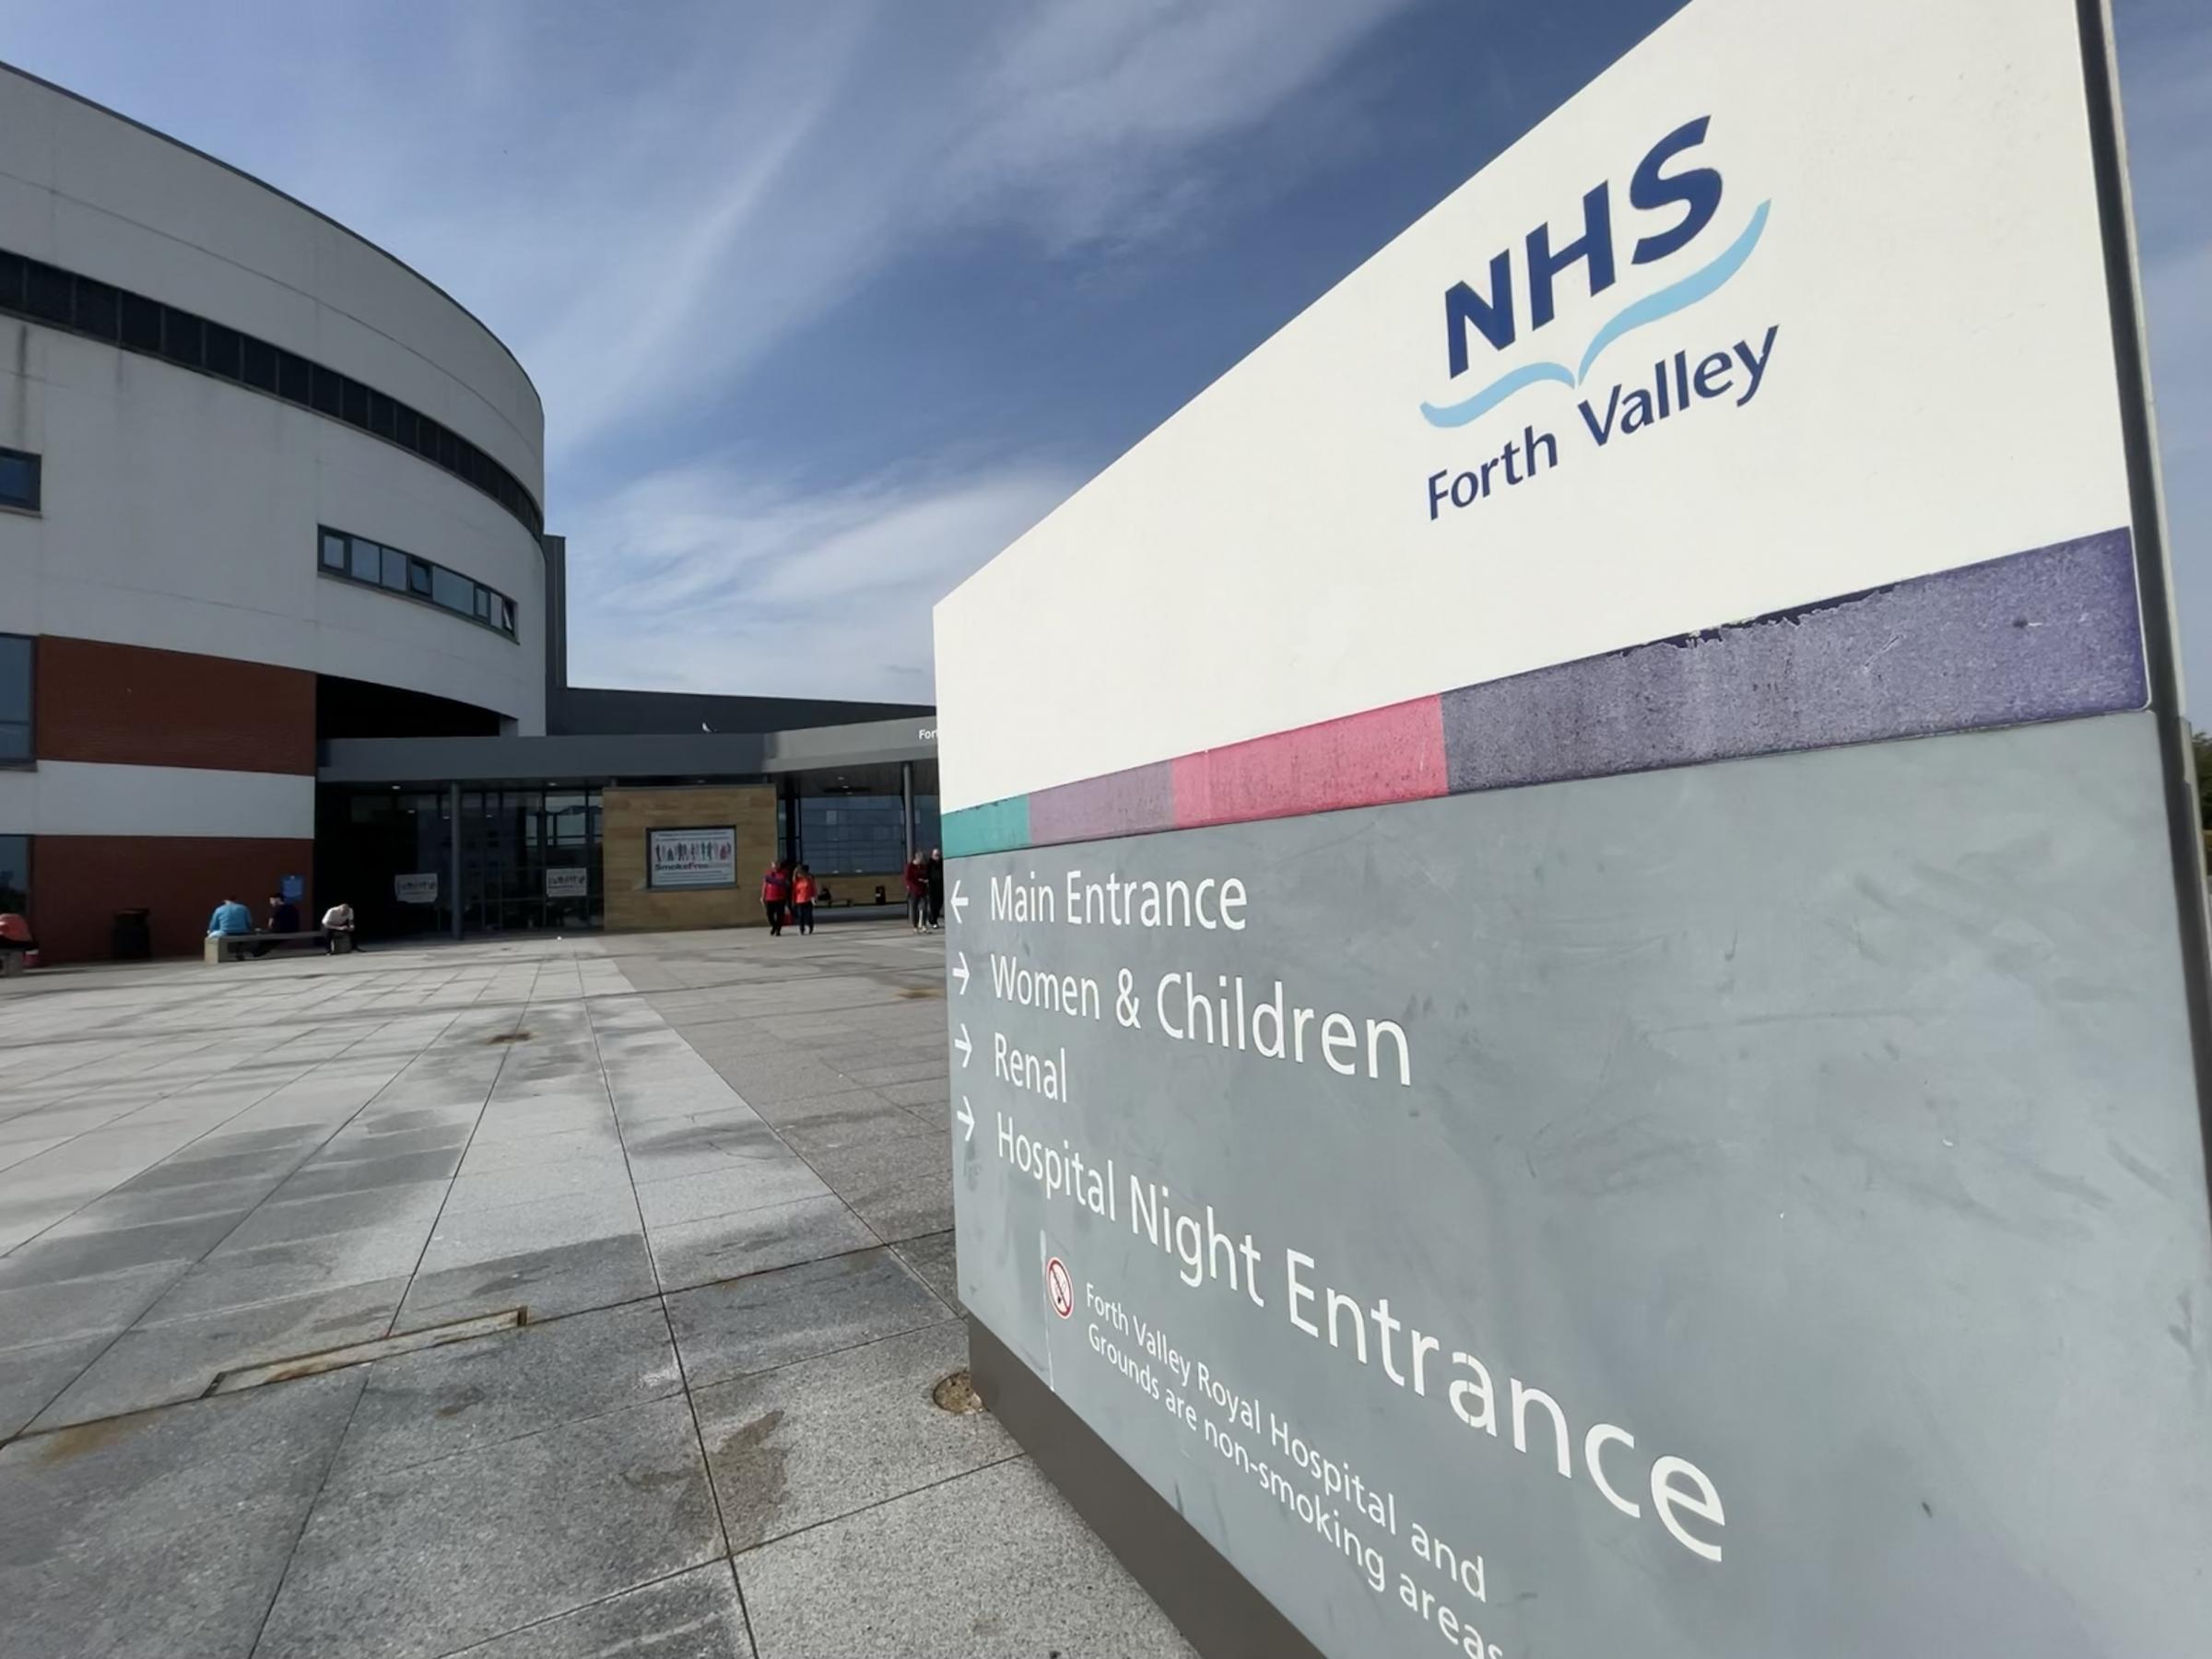 NHS Forth Valley will also share the cost of any funding shortfall